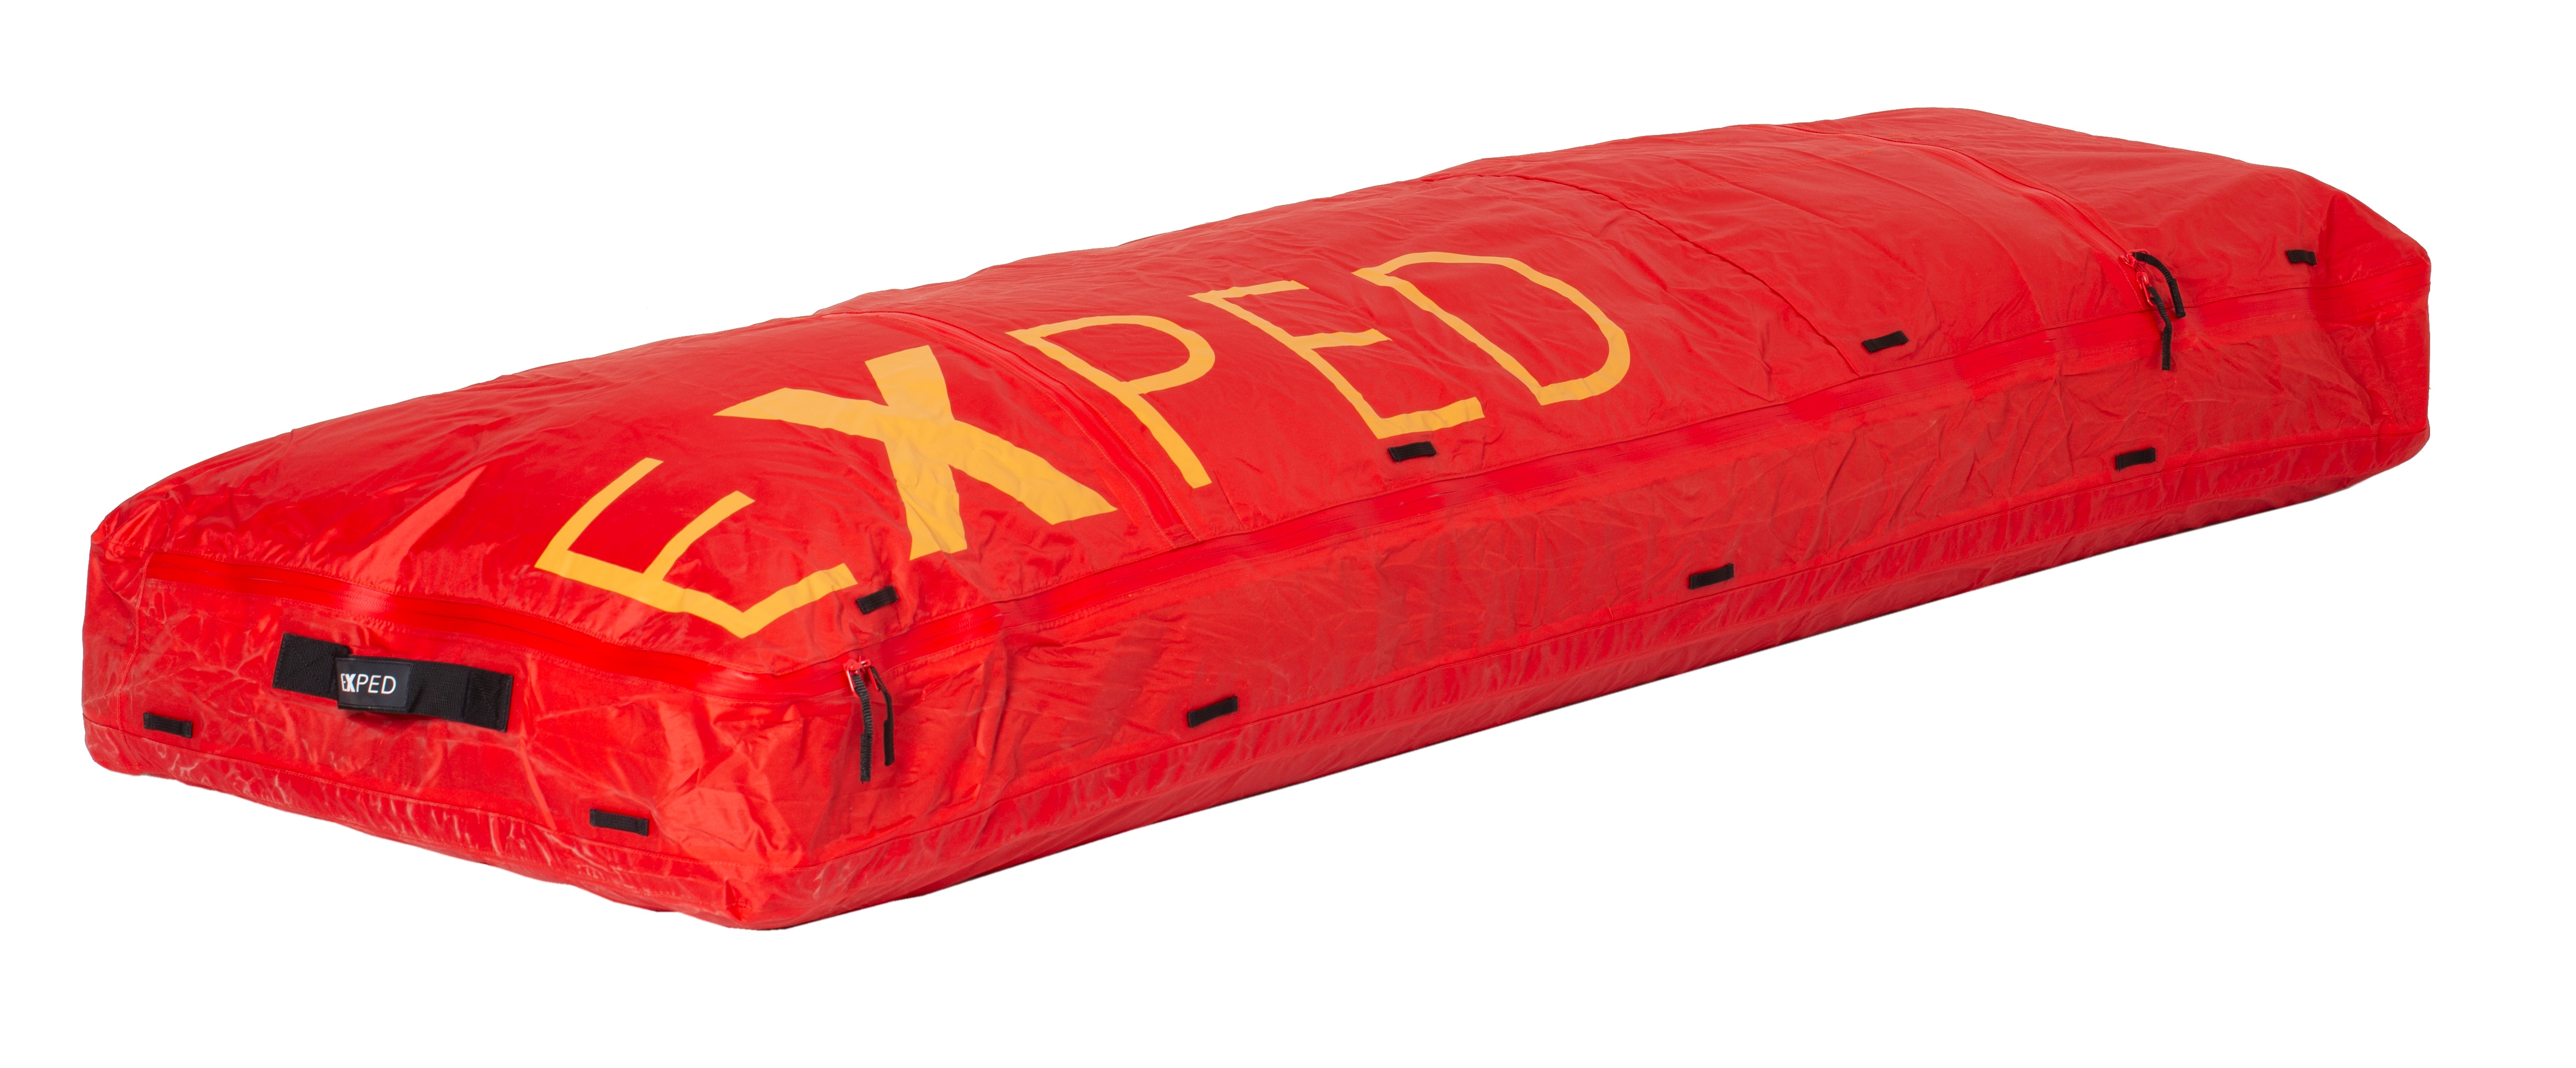 Expedition Bedding_red